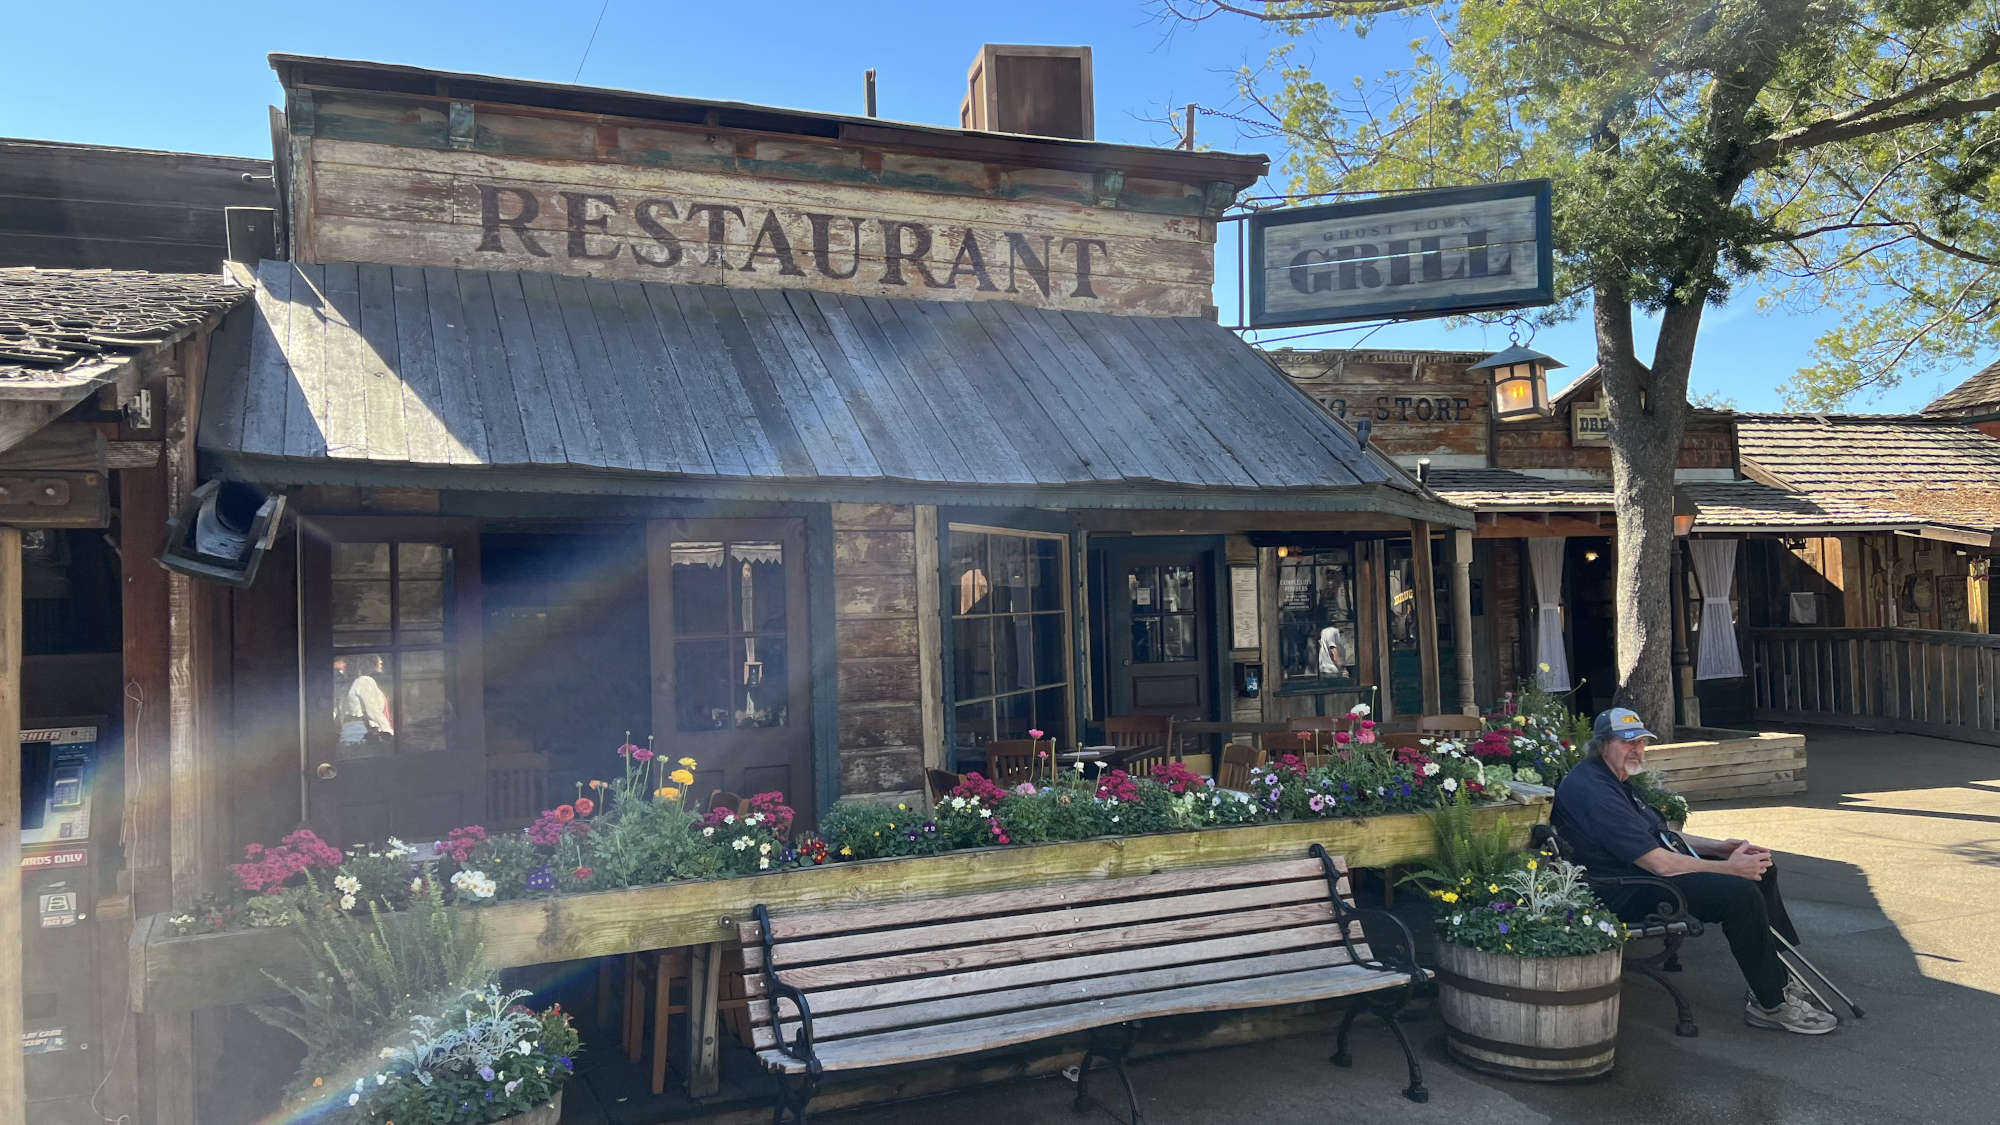 Knott's Berry Farm Ghost Town Grill